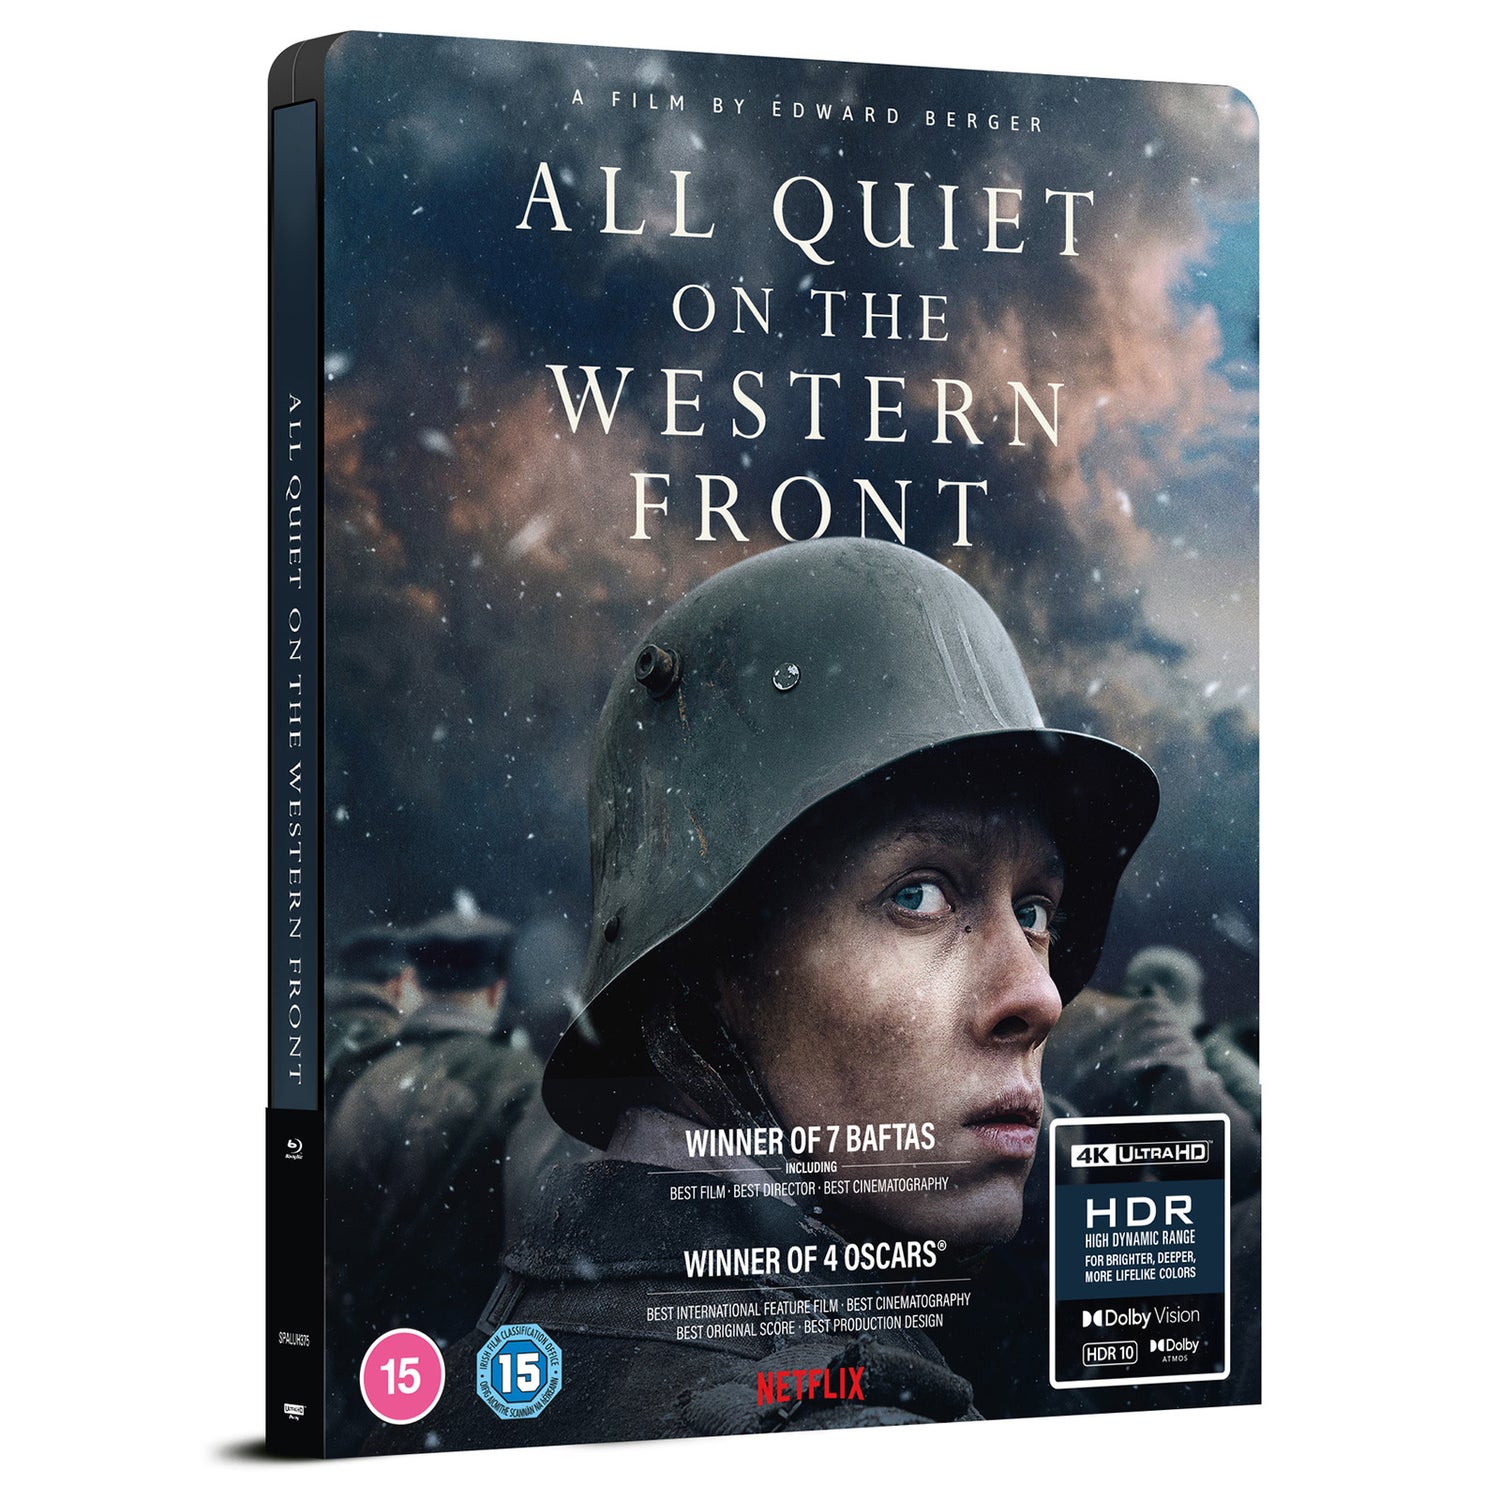 All Quiet on the Western Front 4K Ultra HD & Blu-Ray Steelbook